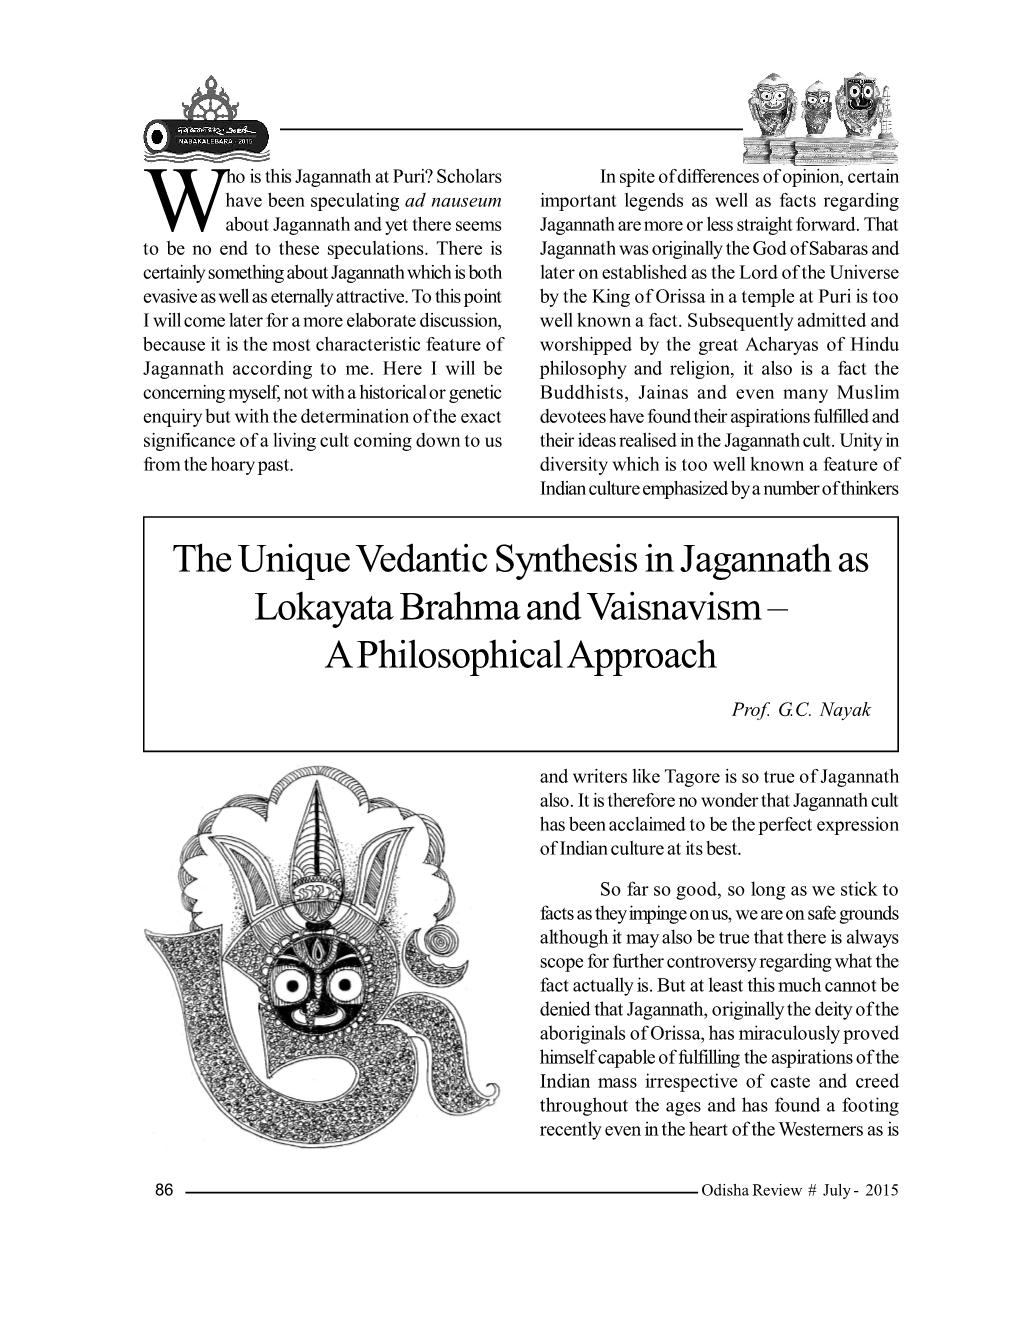 The Unique Vedantic Synthesis in Jagannath As Lokayata Brahma and Vaisnavism – a Philosophical Approach